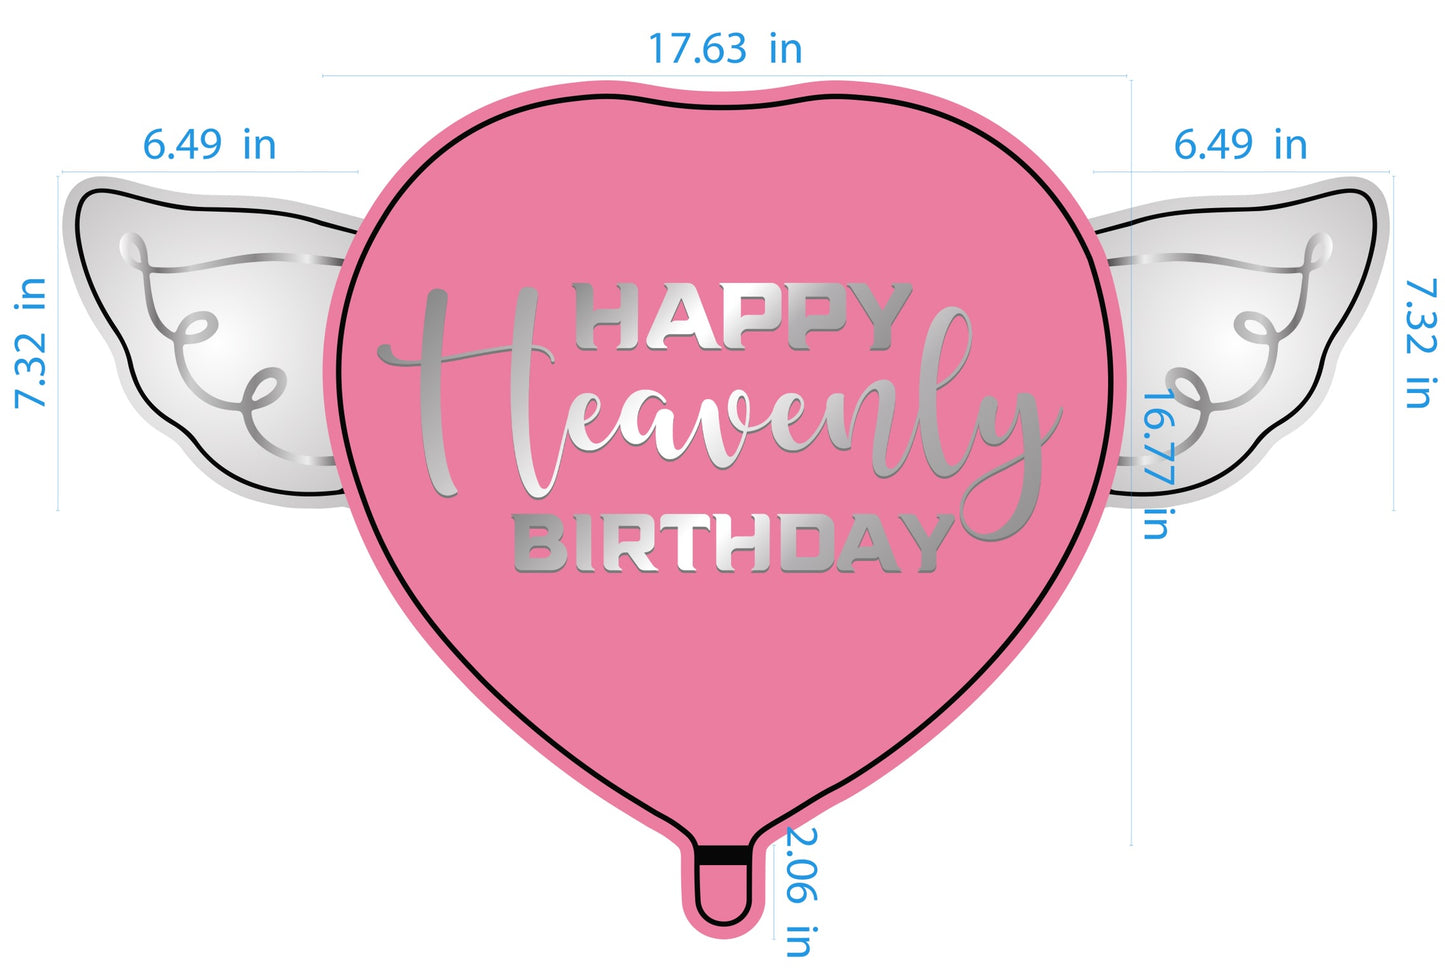 Happy Heavenly Birthday Heart Shaped Balloons with angel wings dimension